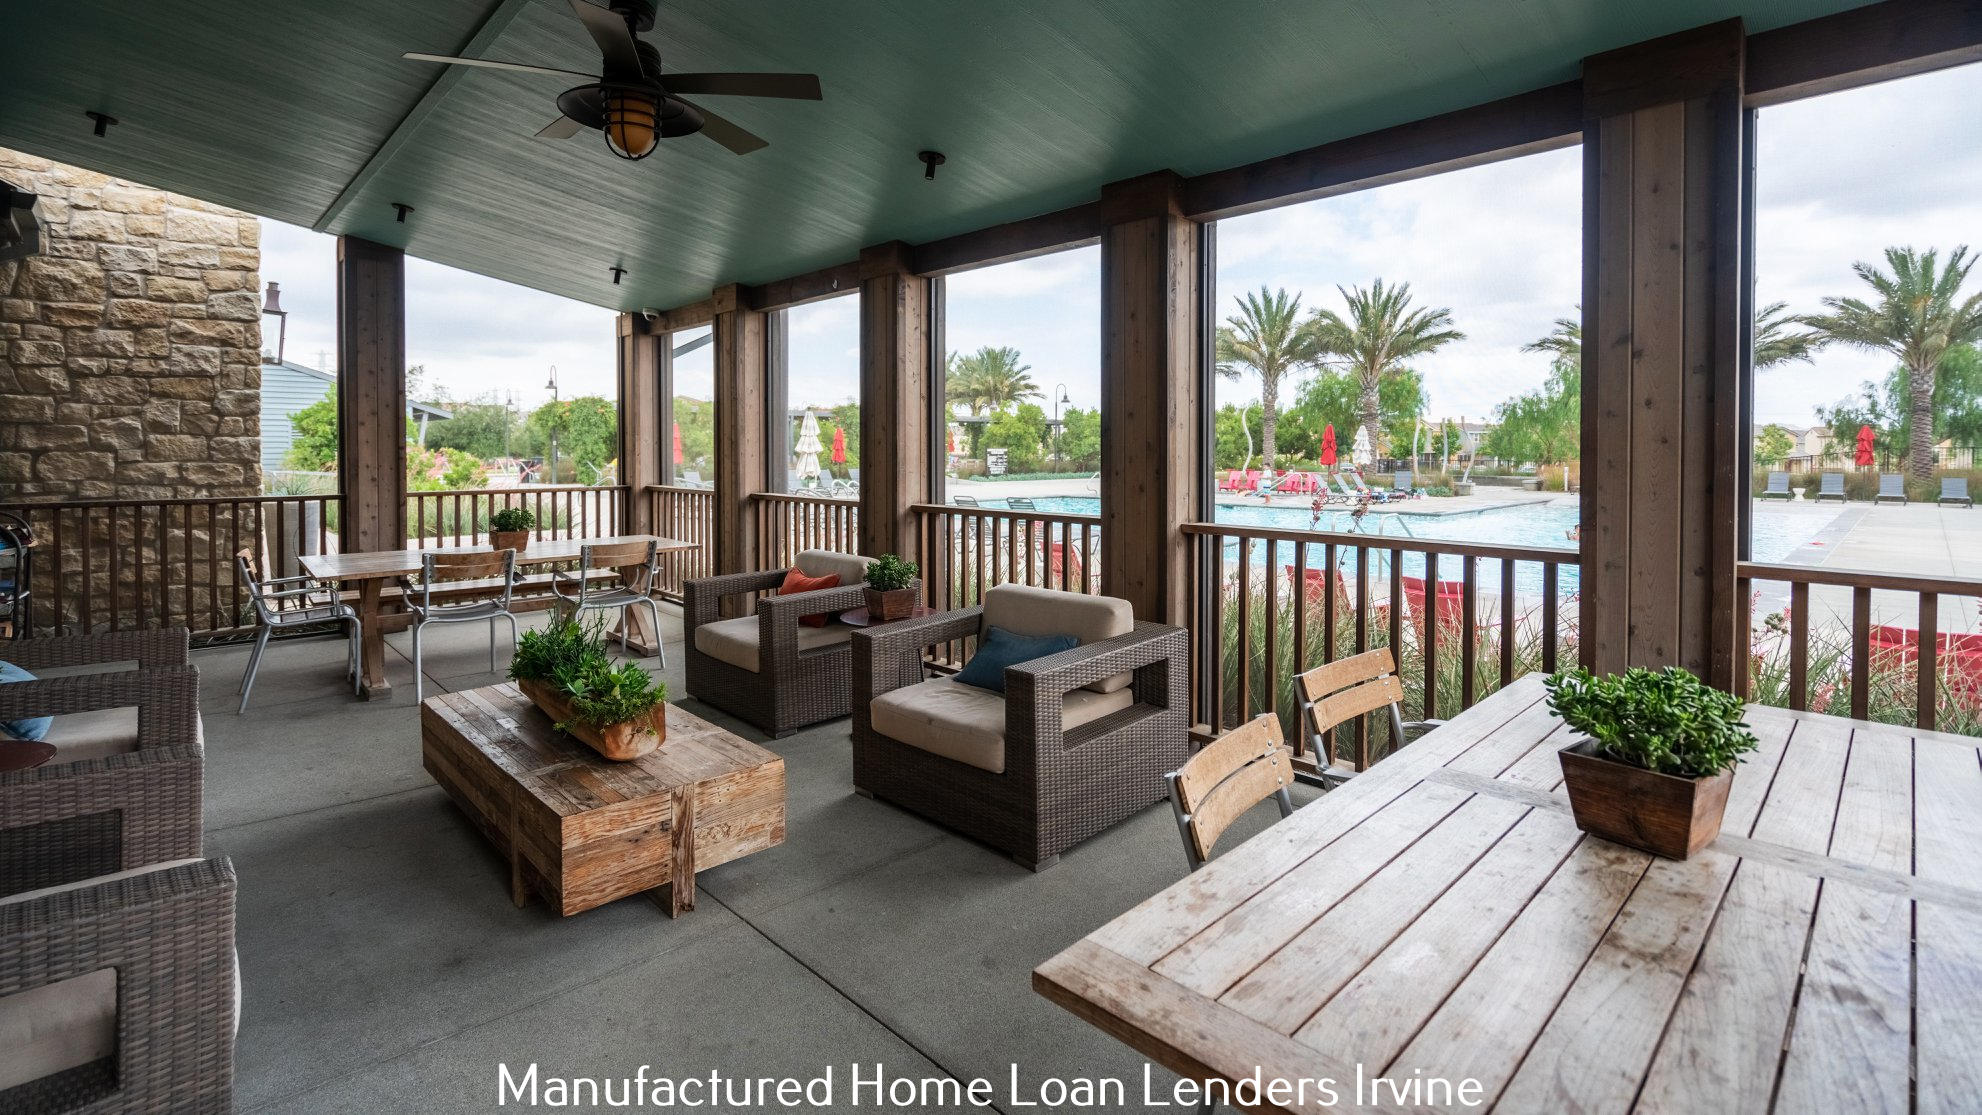 Smart Money Mortgage Shares Tips for Securing a Manufactured Home Loan